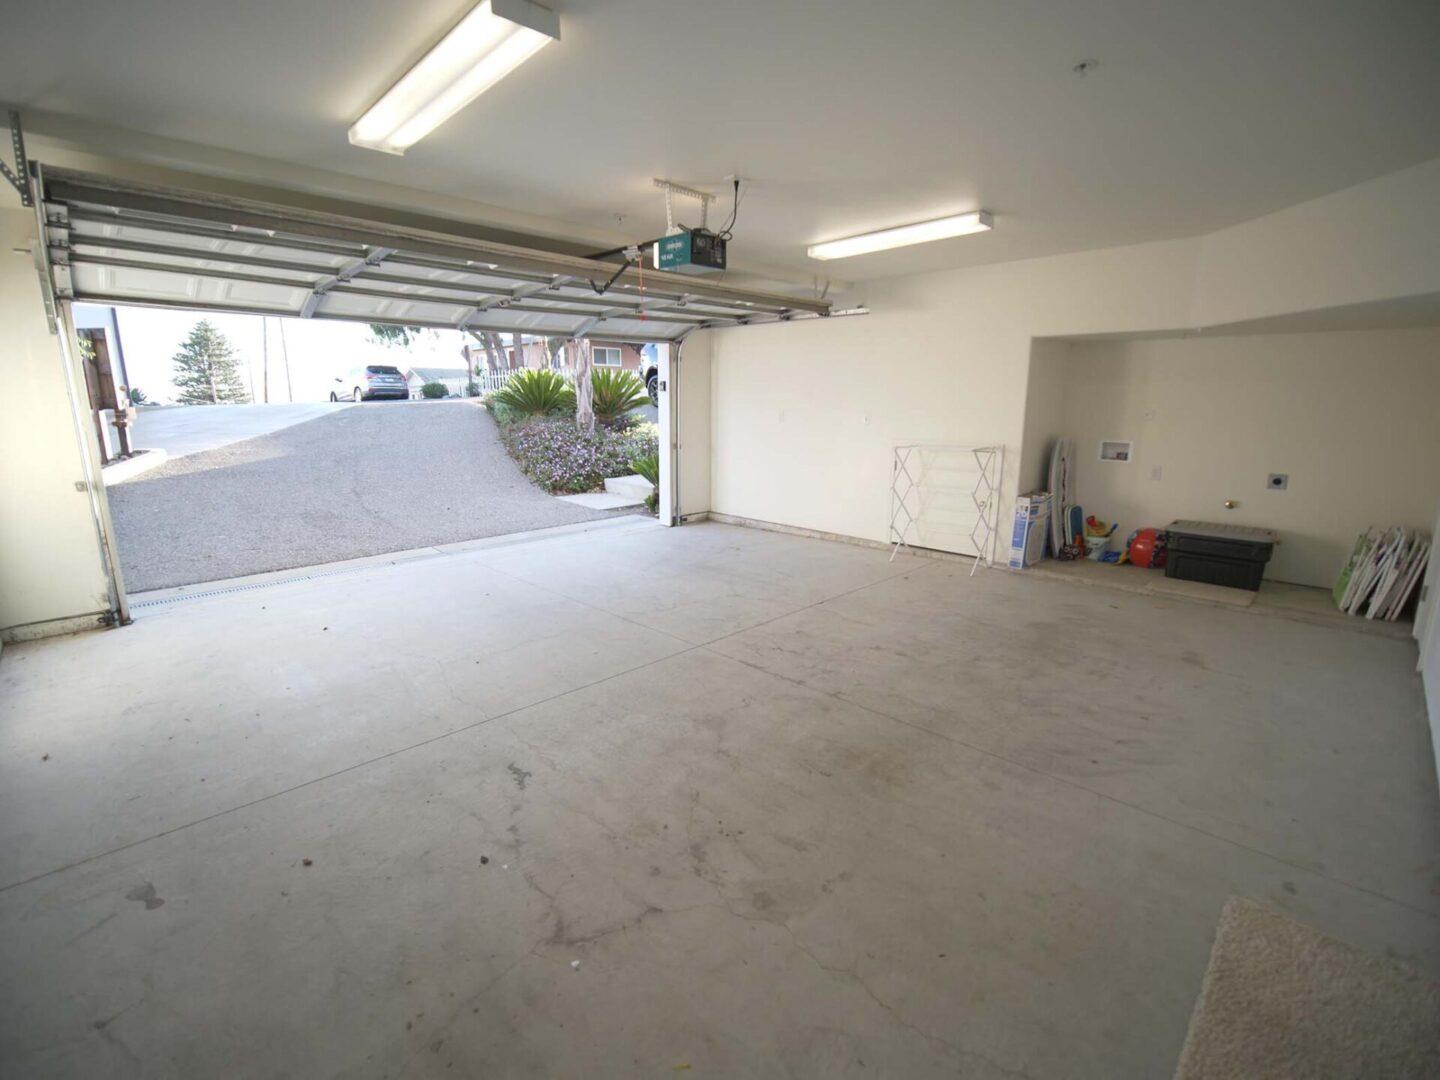 A garage with concrete floors and walls.